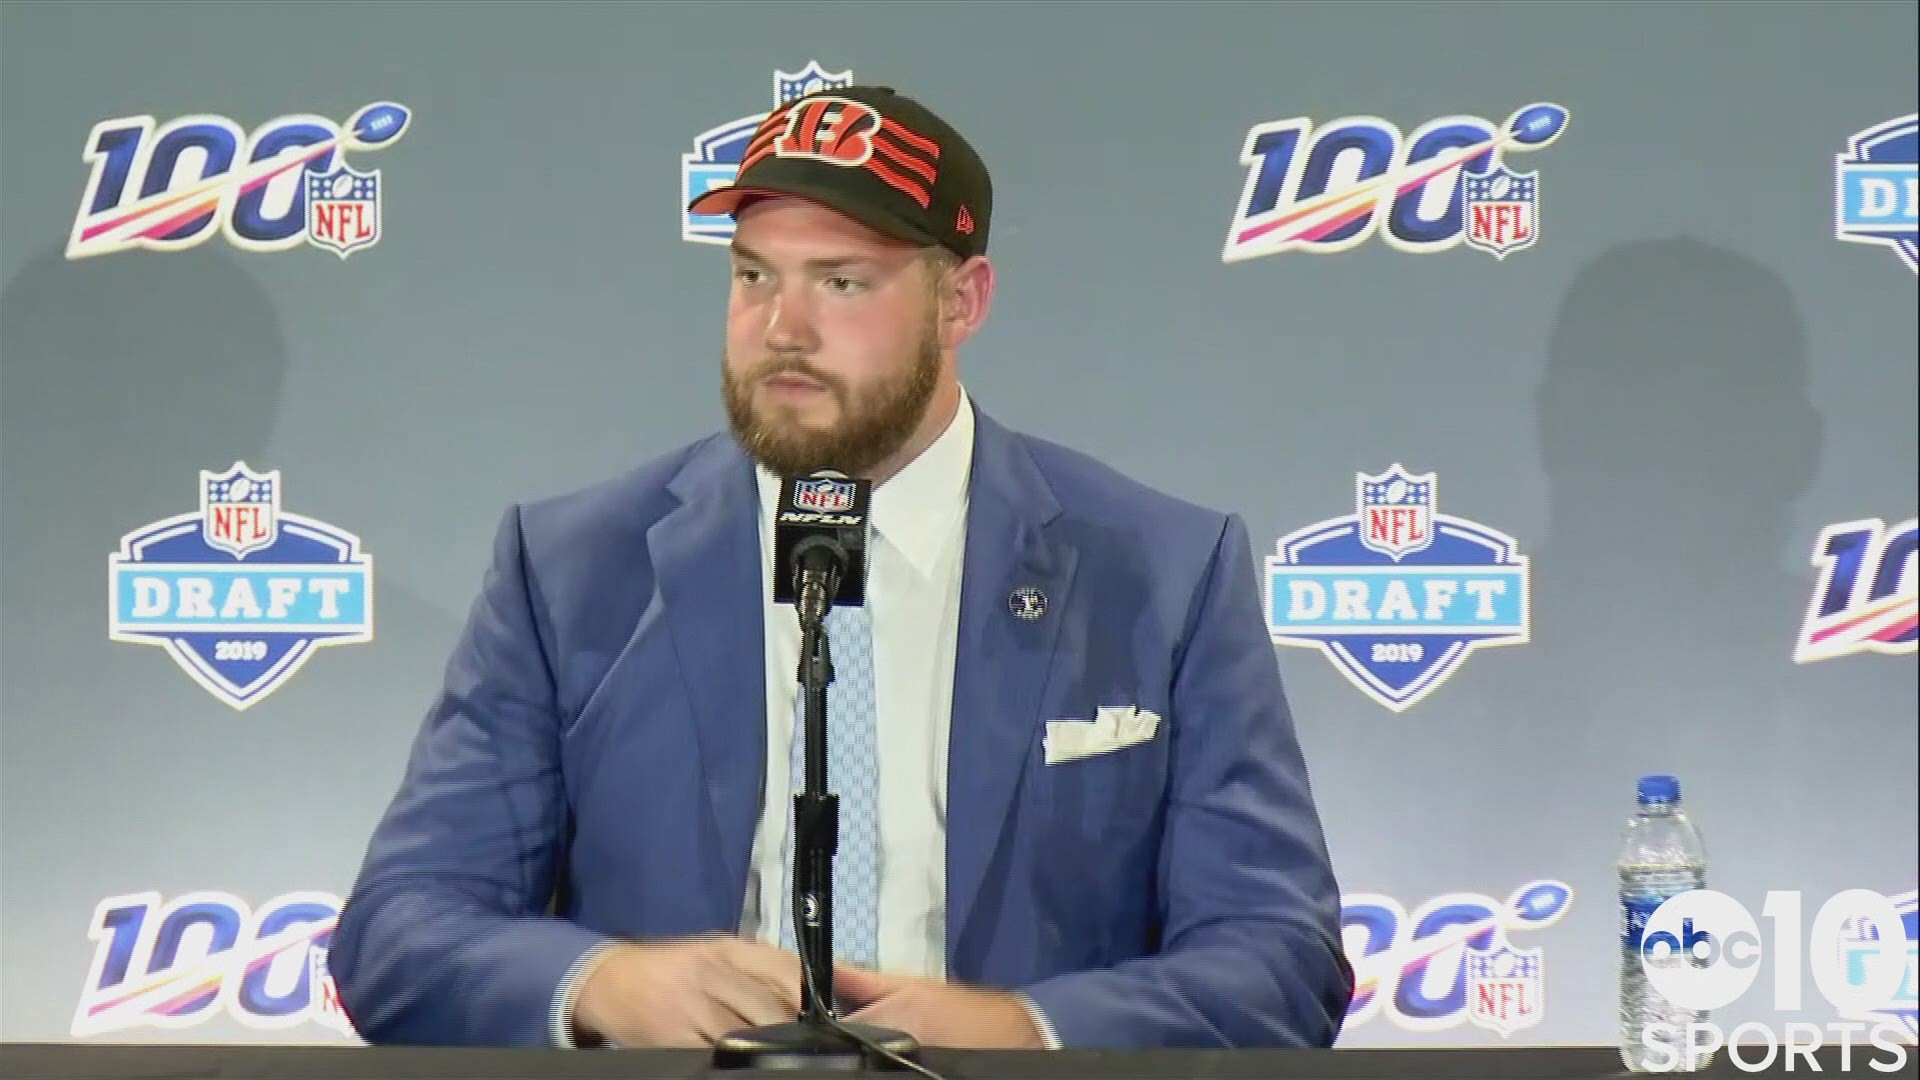 Former Folsom Bulldogs star Jonah Williams talks about being selected out of Alabama to the Cincinnati Bengals with the 11th overall pick of the 2019 NFL Draft in Nashville.